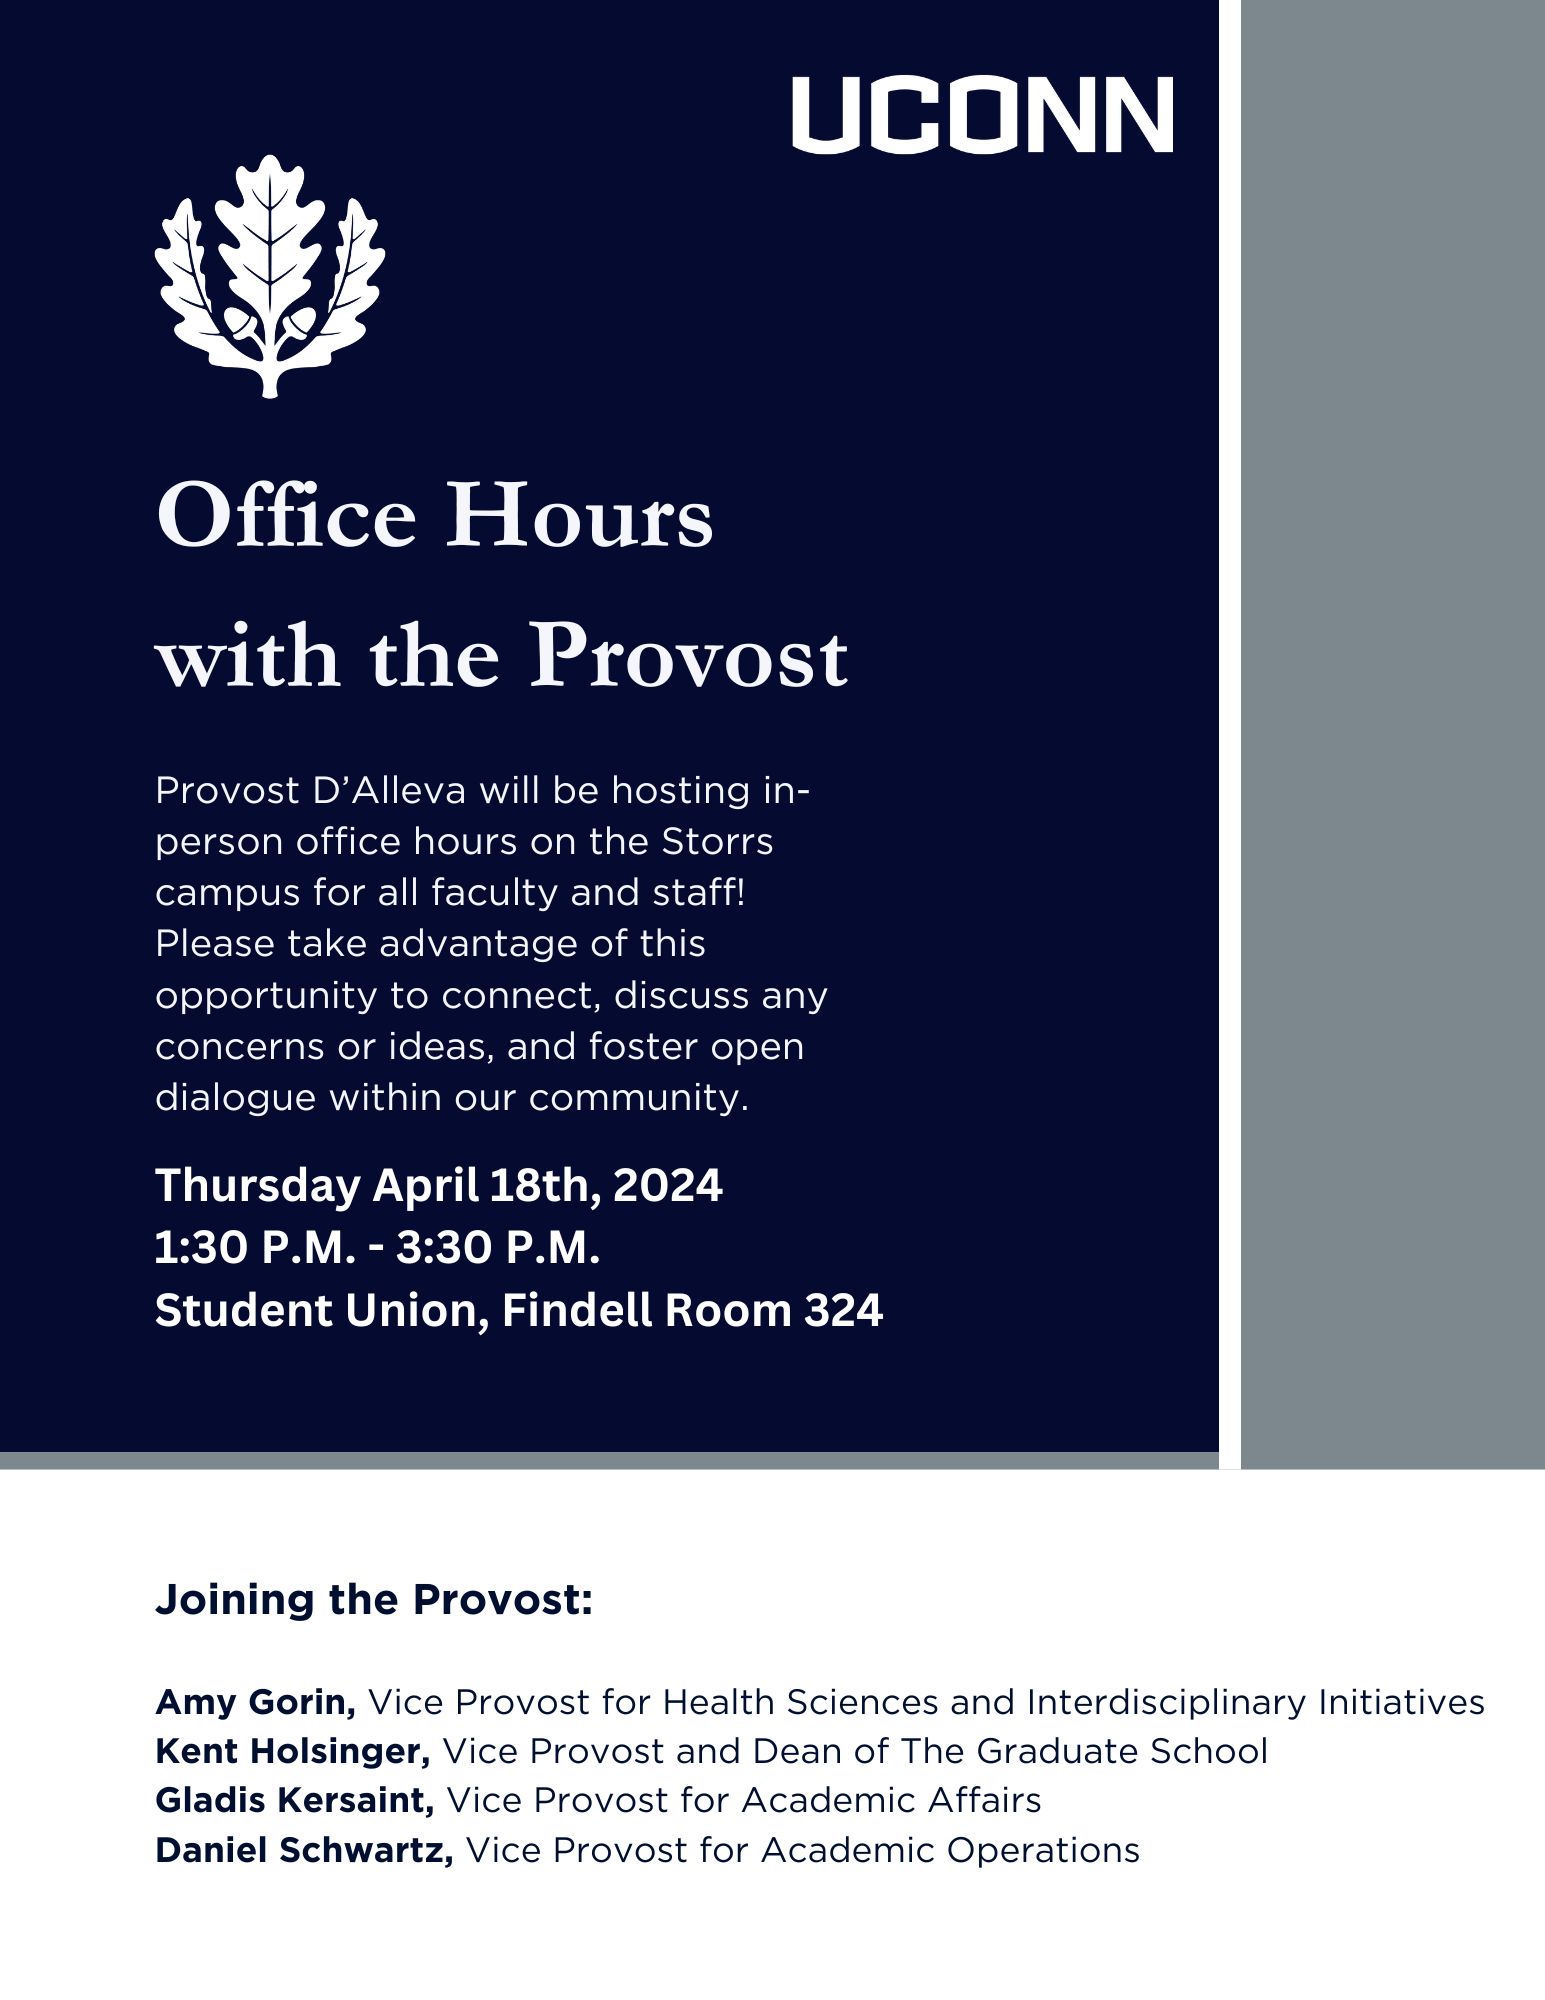 Office Hours with the Provost (2)